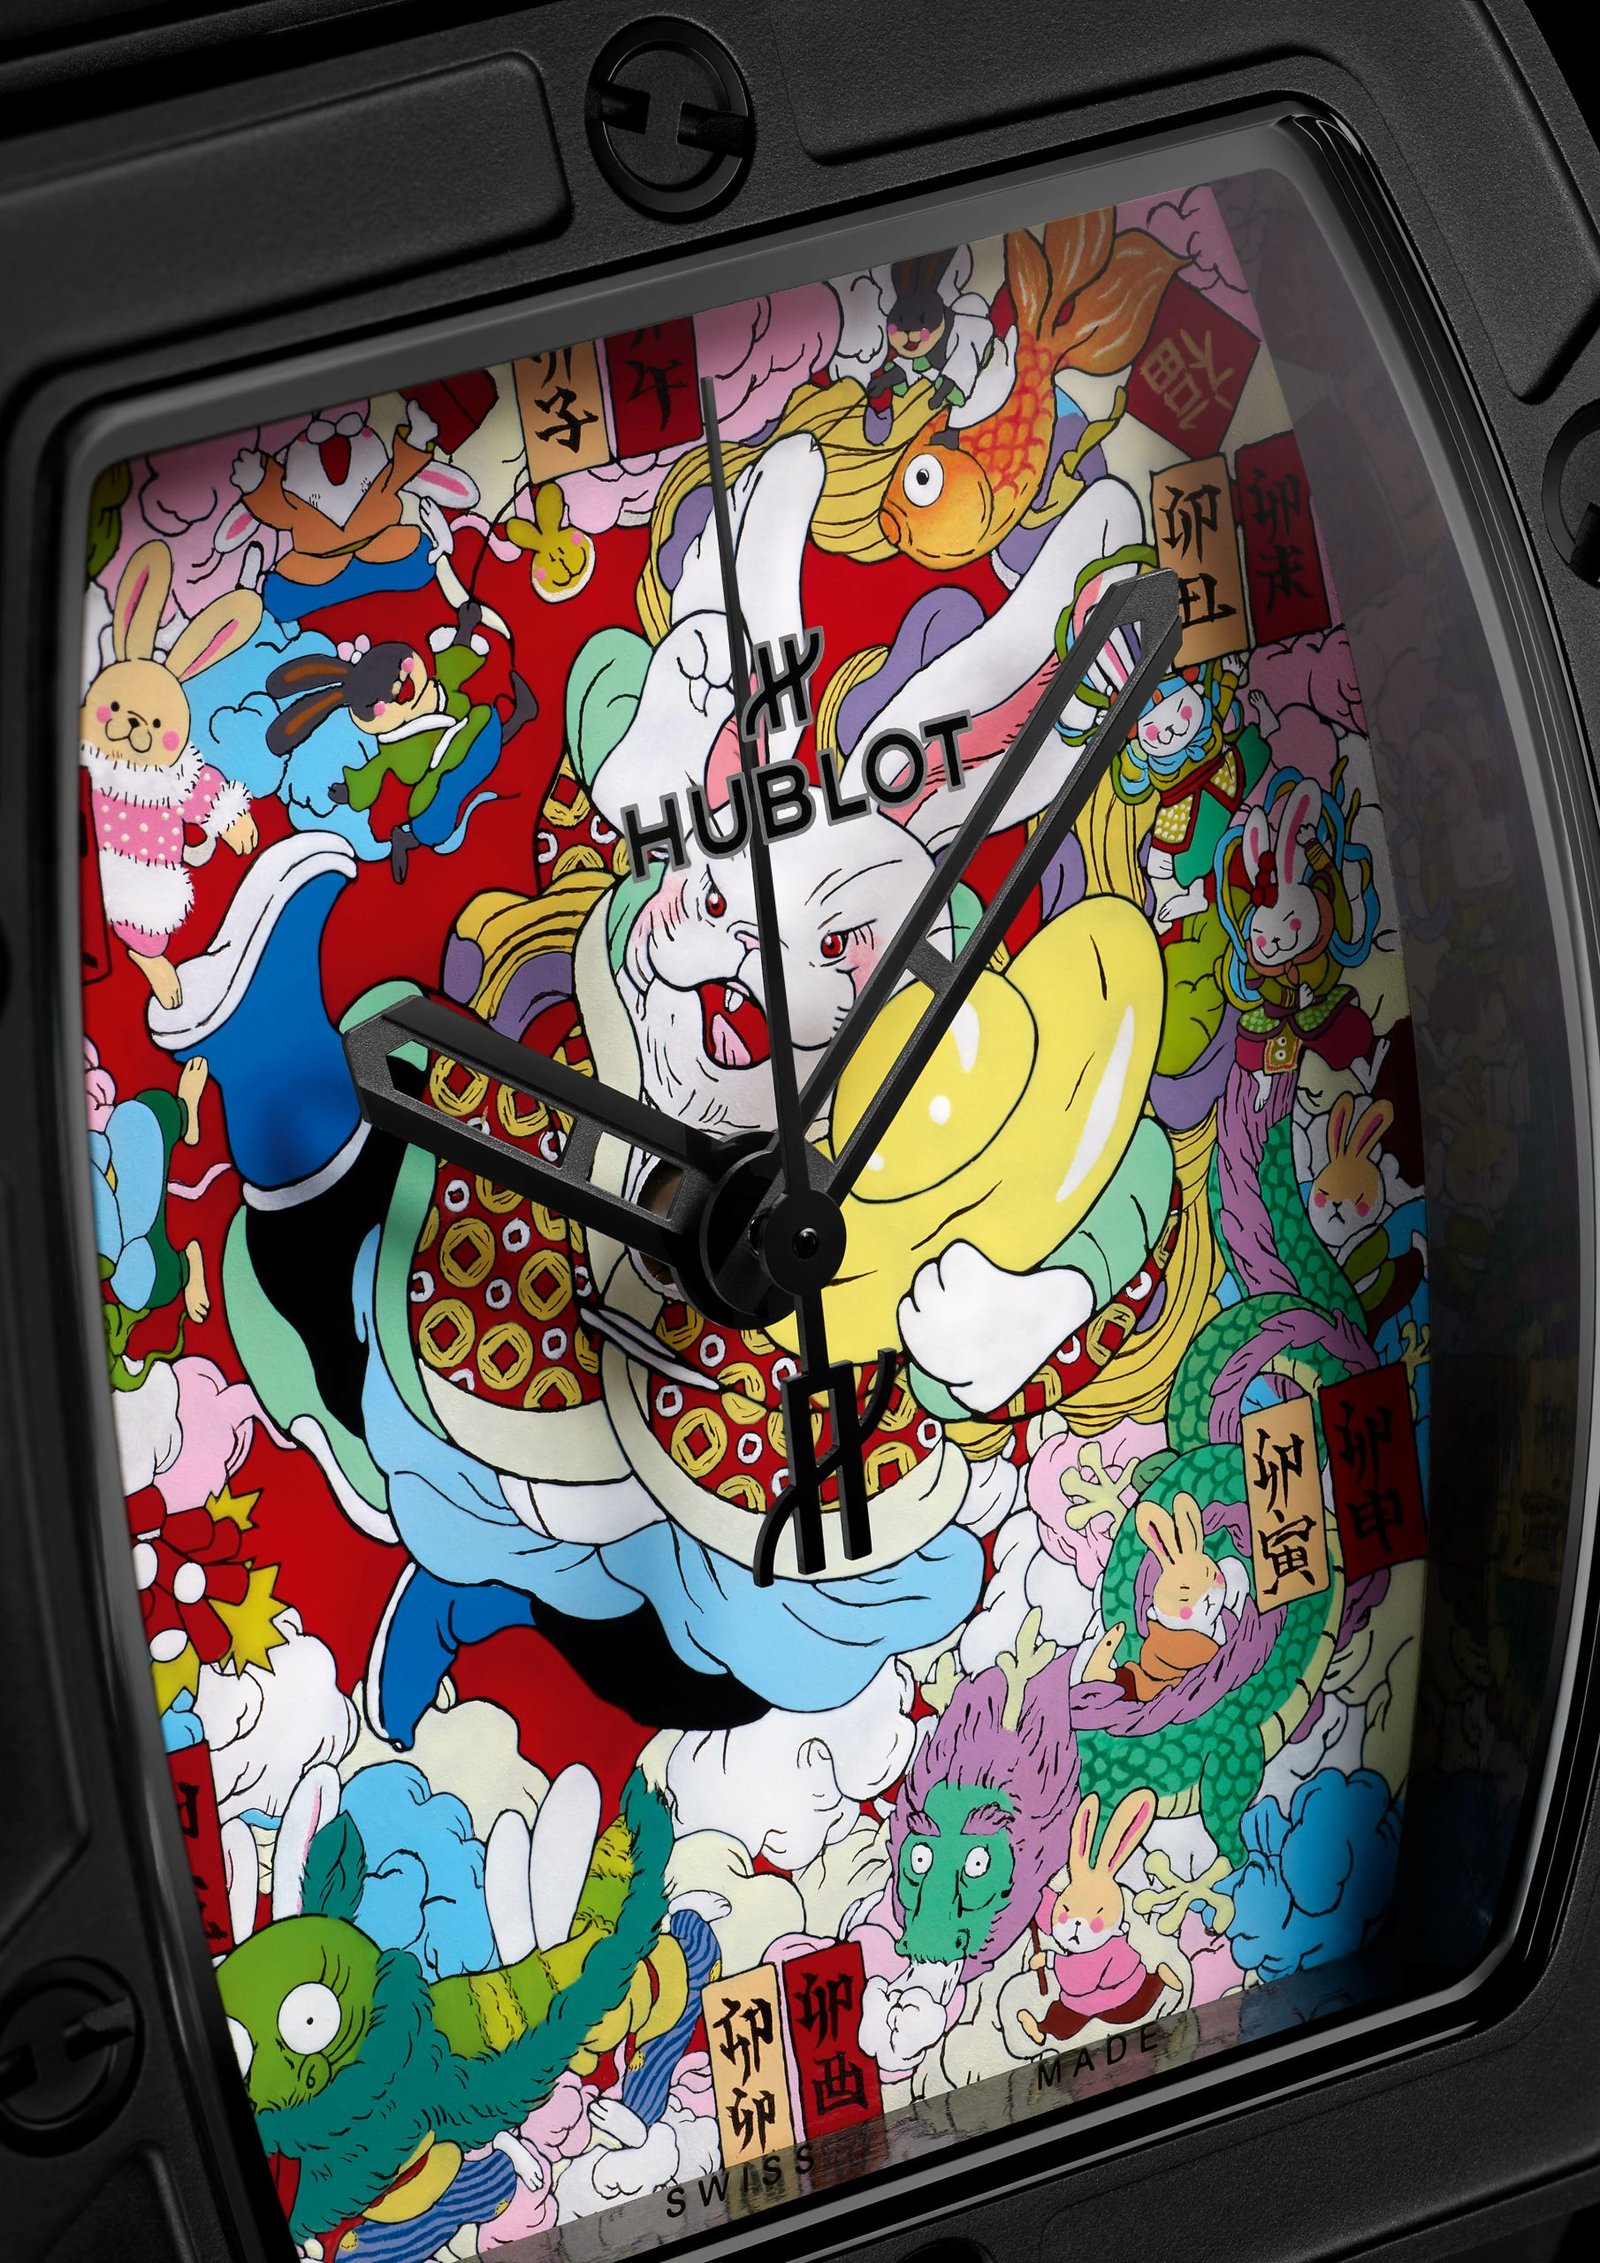 HUBLOT CELEBRATES THE YEAR OF THE RABBIT: “HAPPY 兔-GETHER (TO-GETHER)” © Copyright PLPG GLOBAL MEDIA 2023